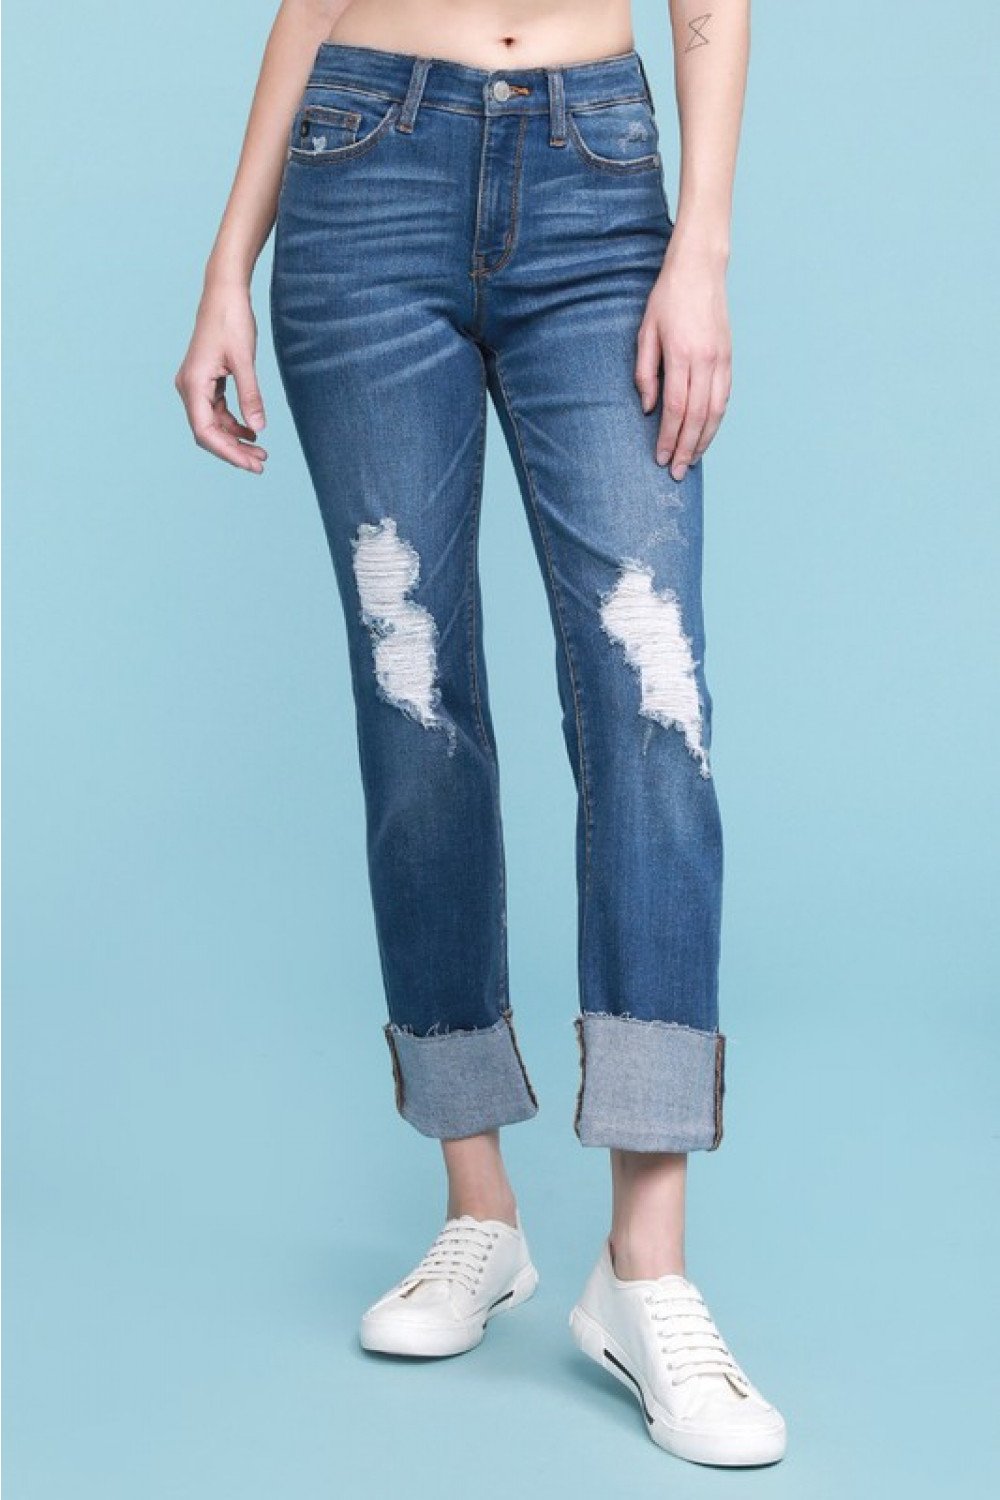 Made for Comfort Judy Blue Jeans